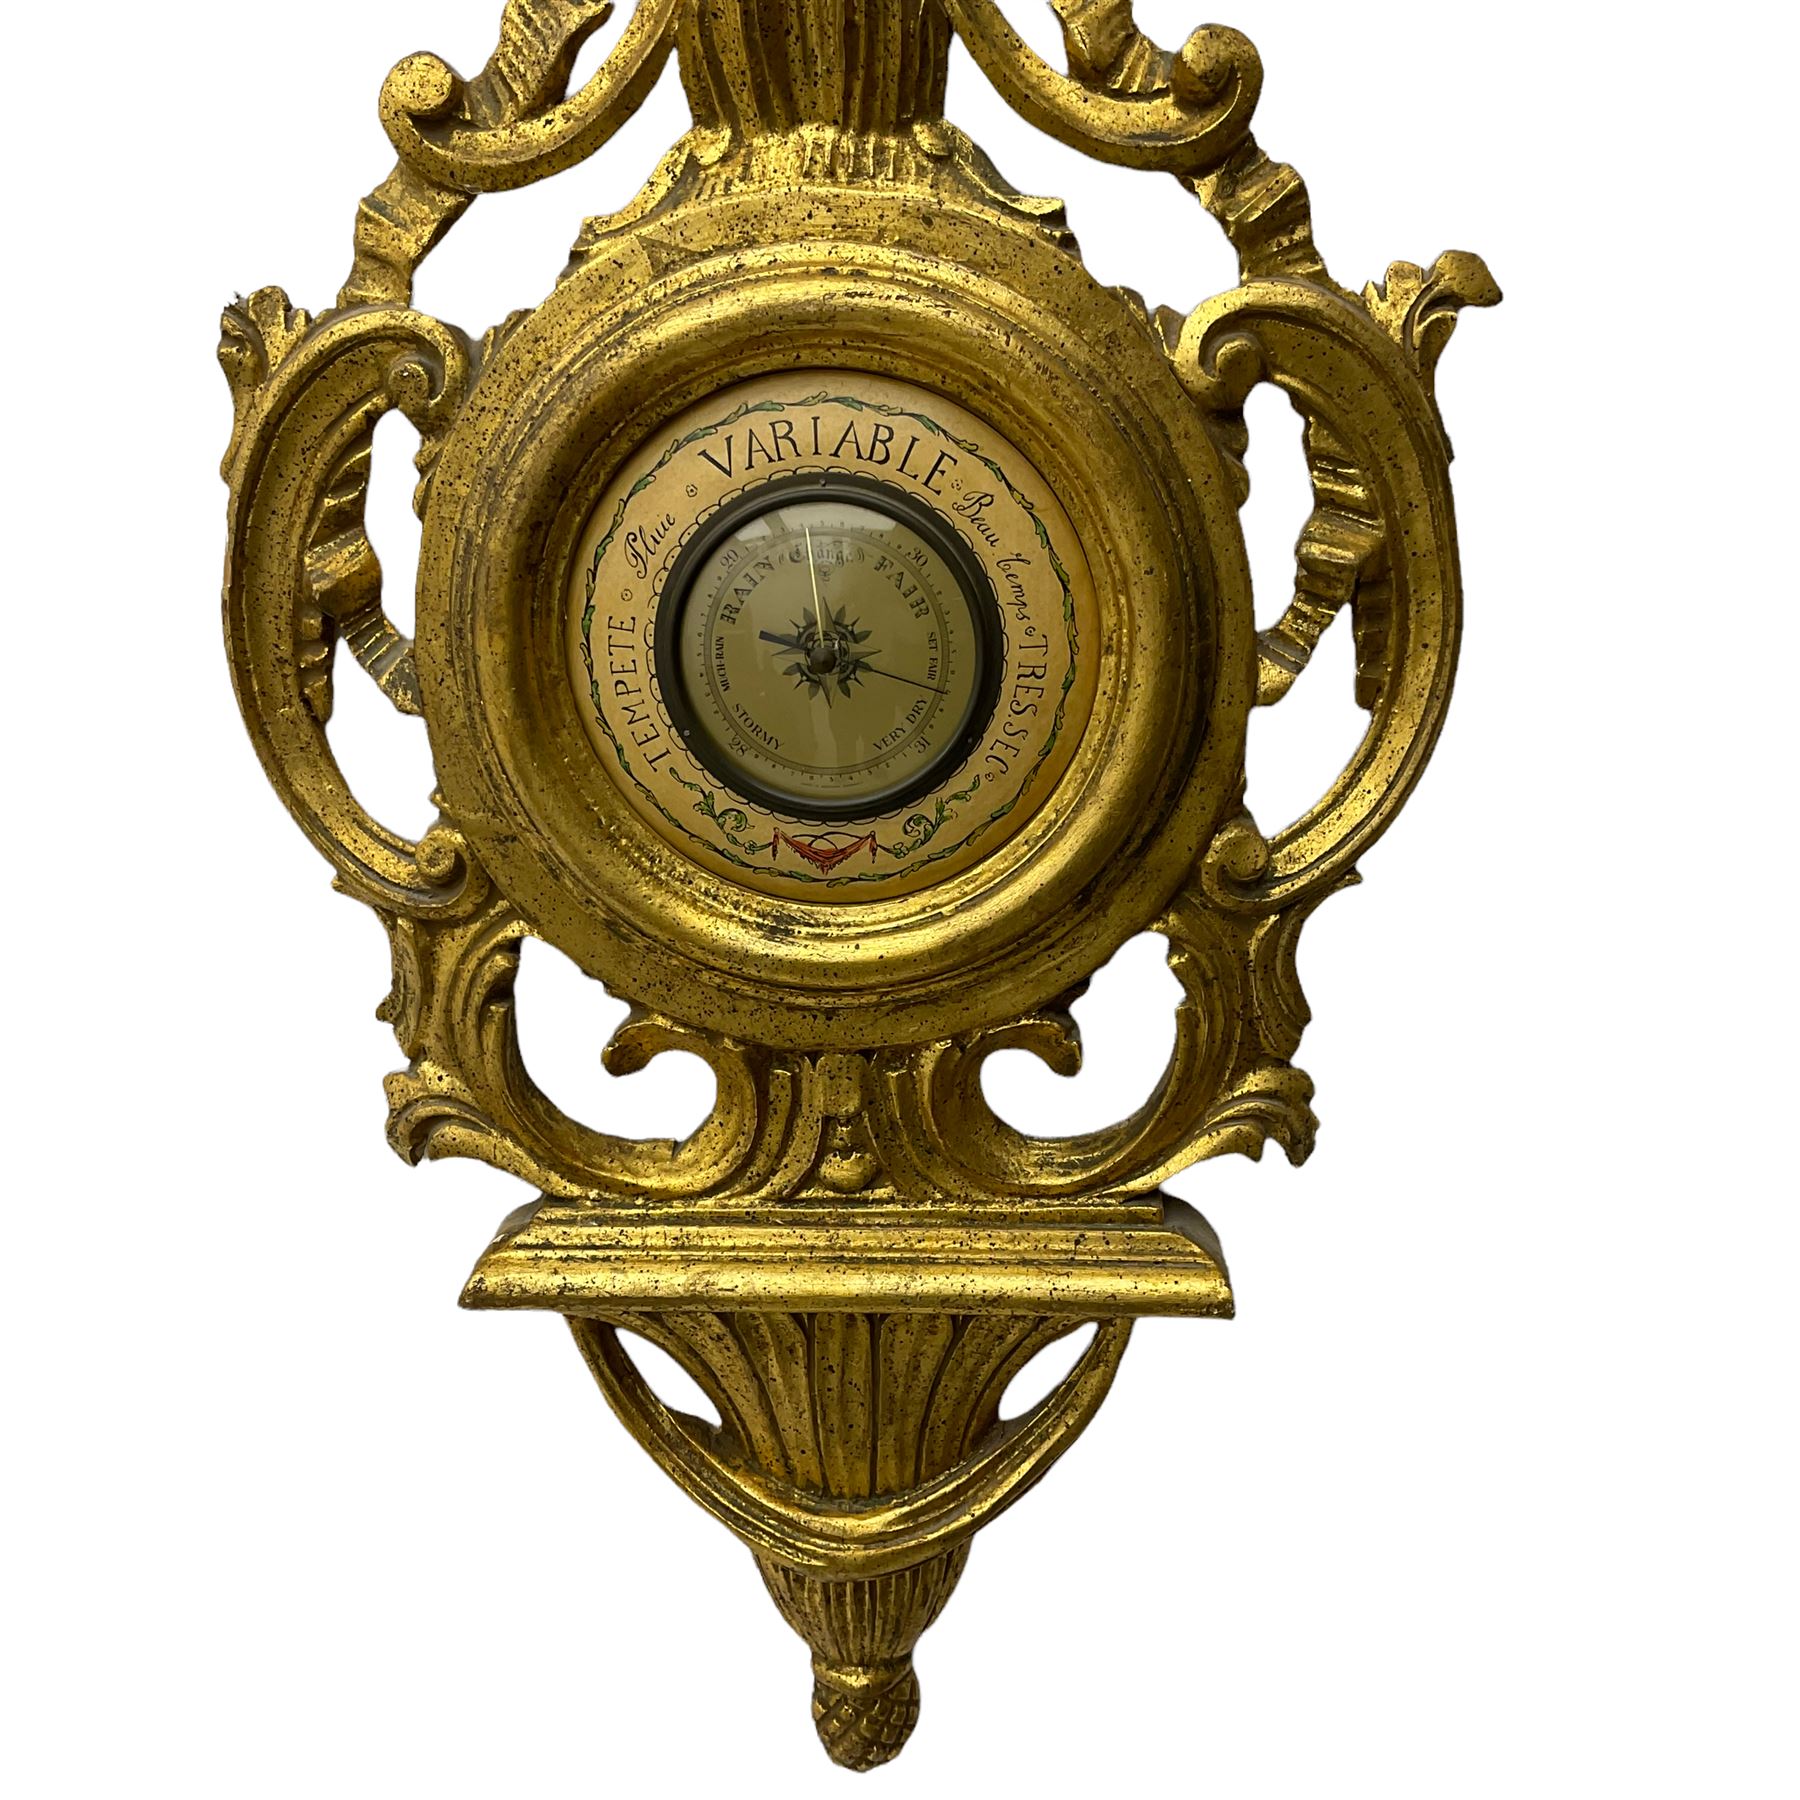 A 20th century Italian barometer in a carved gilt wood case in the late 18th century rococo style - Image 3 of 4